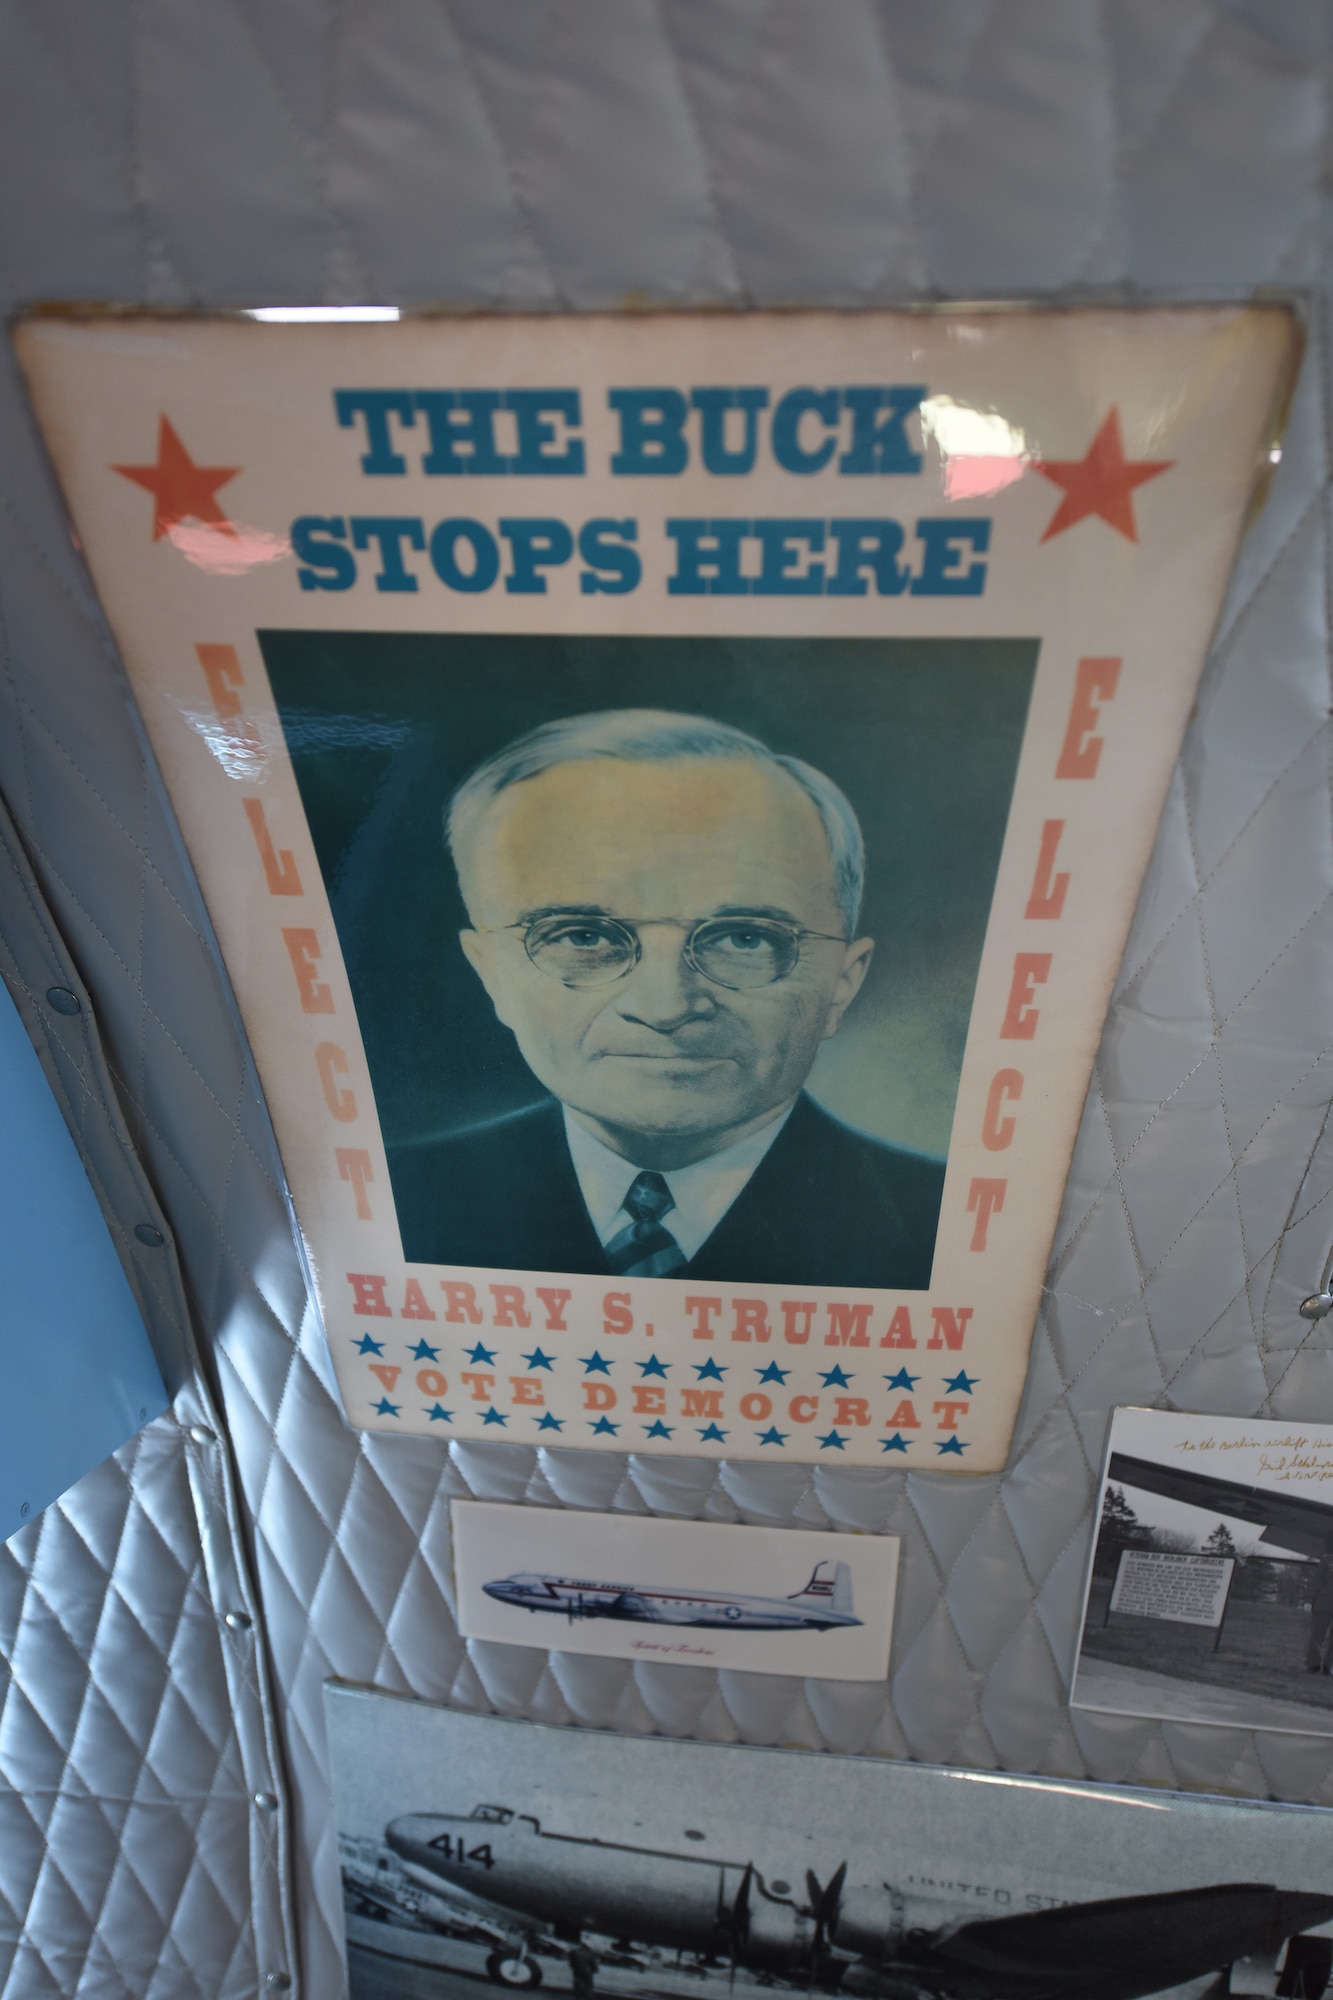 An old election poster hangs inside a C-54E Skymaster named “Spirit of Freedom” at the Great Falls International Airport, Sept. 9, 2016. The Spirit of Freedom is a flying museum being flown all over the country by members of the Berlin Airlift Historical Foundation to help raise awareness of the Berlin Airlift. The airlift was a mission that saved nearly 2.4 million Germans from the Soviet-controlled East Berlin in the late 1940s and this is one of the only flight-worthy C-54s remaining in the world. (U.S. Air Force photo/Tech. Sgt. Chad Thompson)